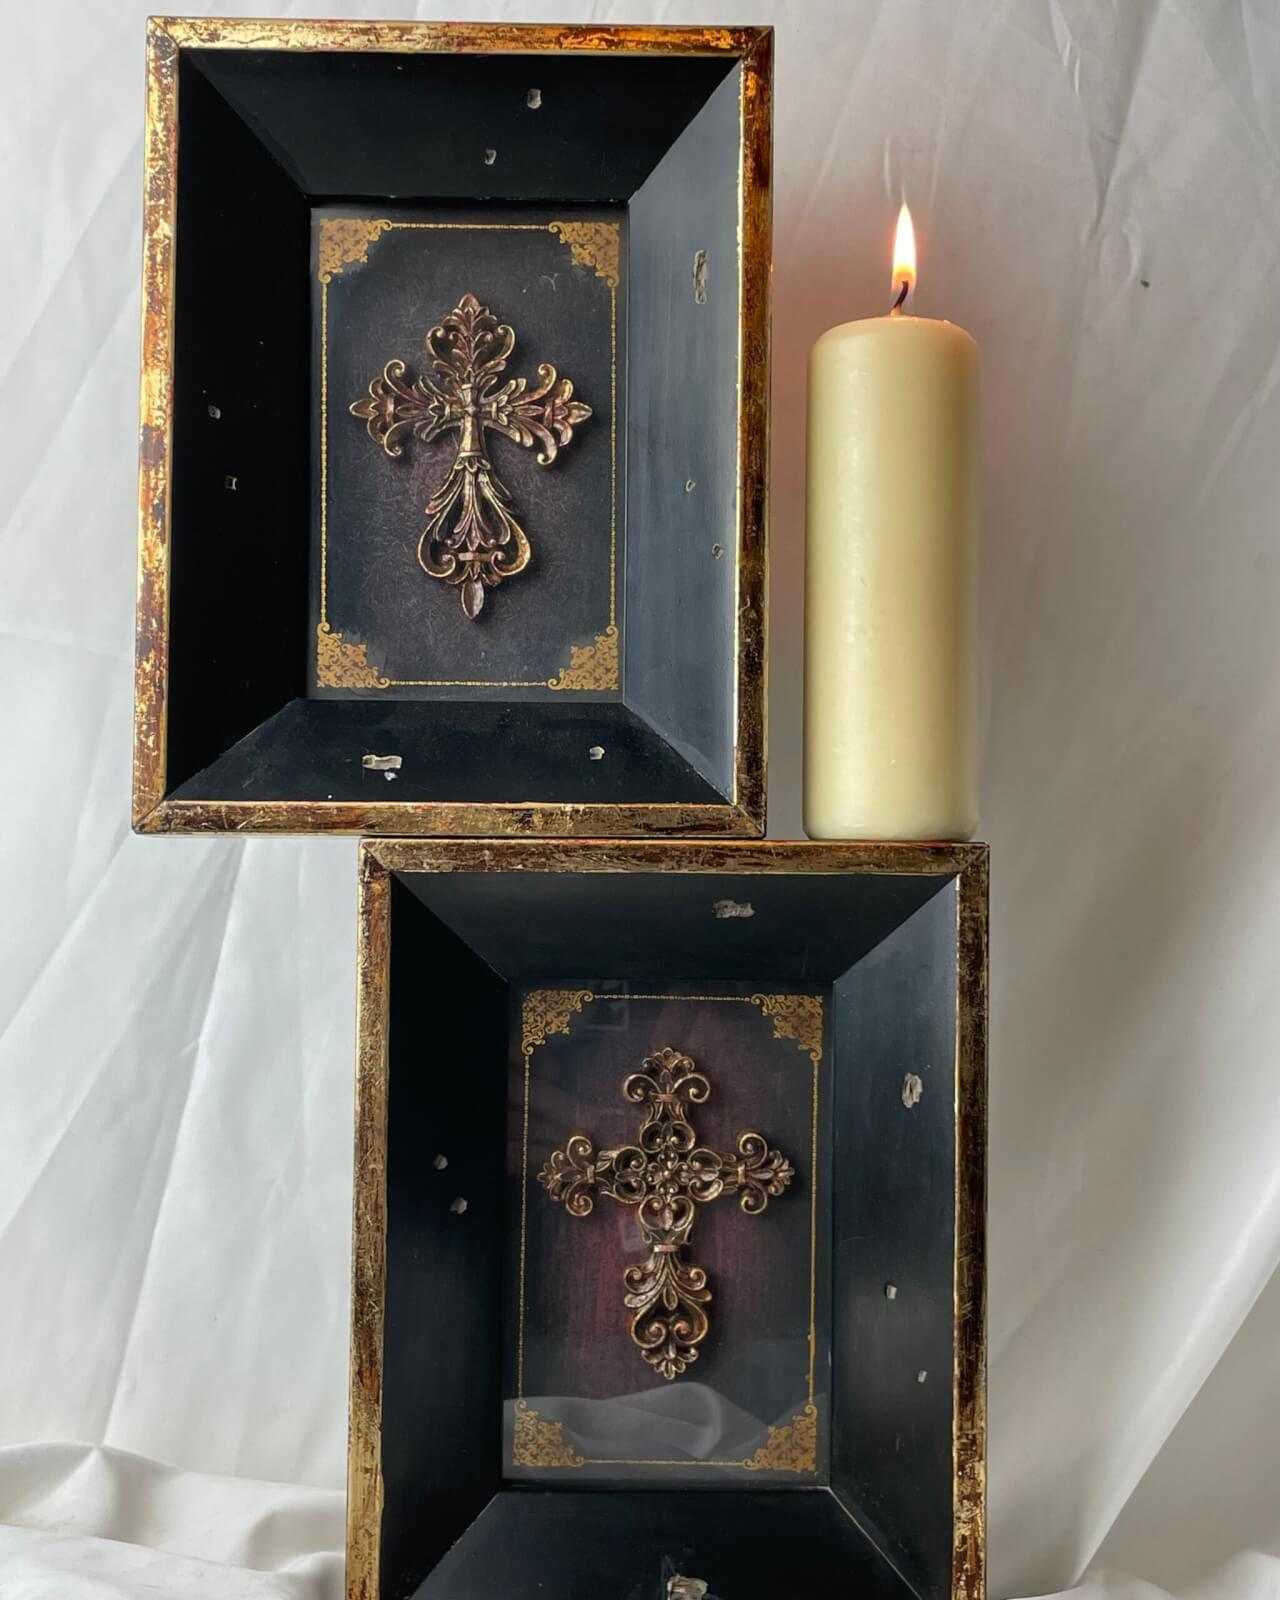 A PAIR of Handsomely Boxed Framed Christian Crosses